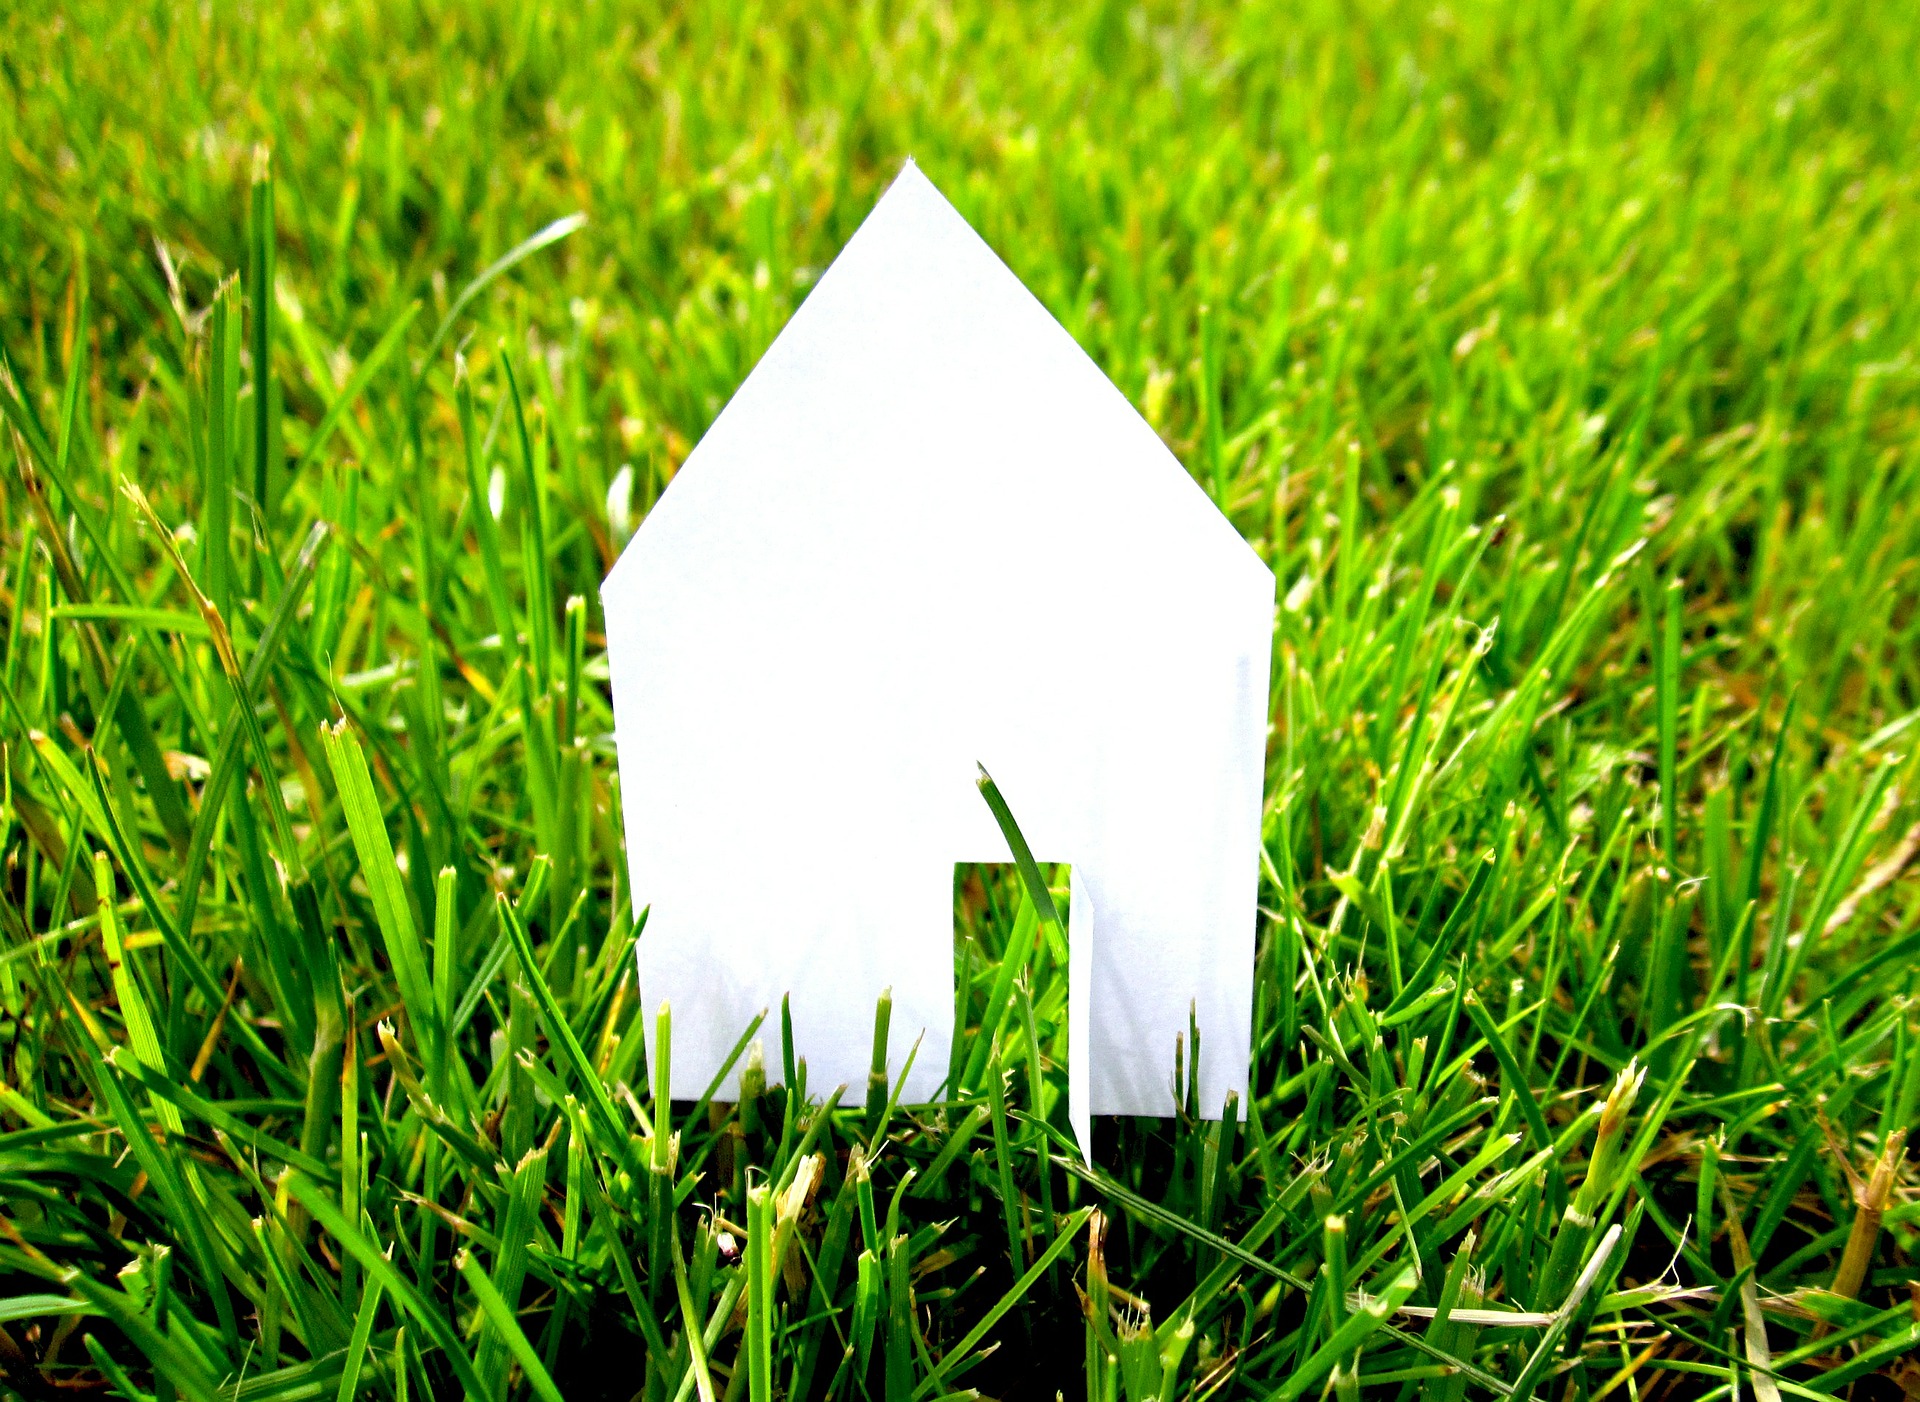 A white paper house in a green, grassy field; our Conveyancing solicitors discuss whether you should use the conveyancing solicitor recommended by your estate agent.